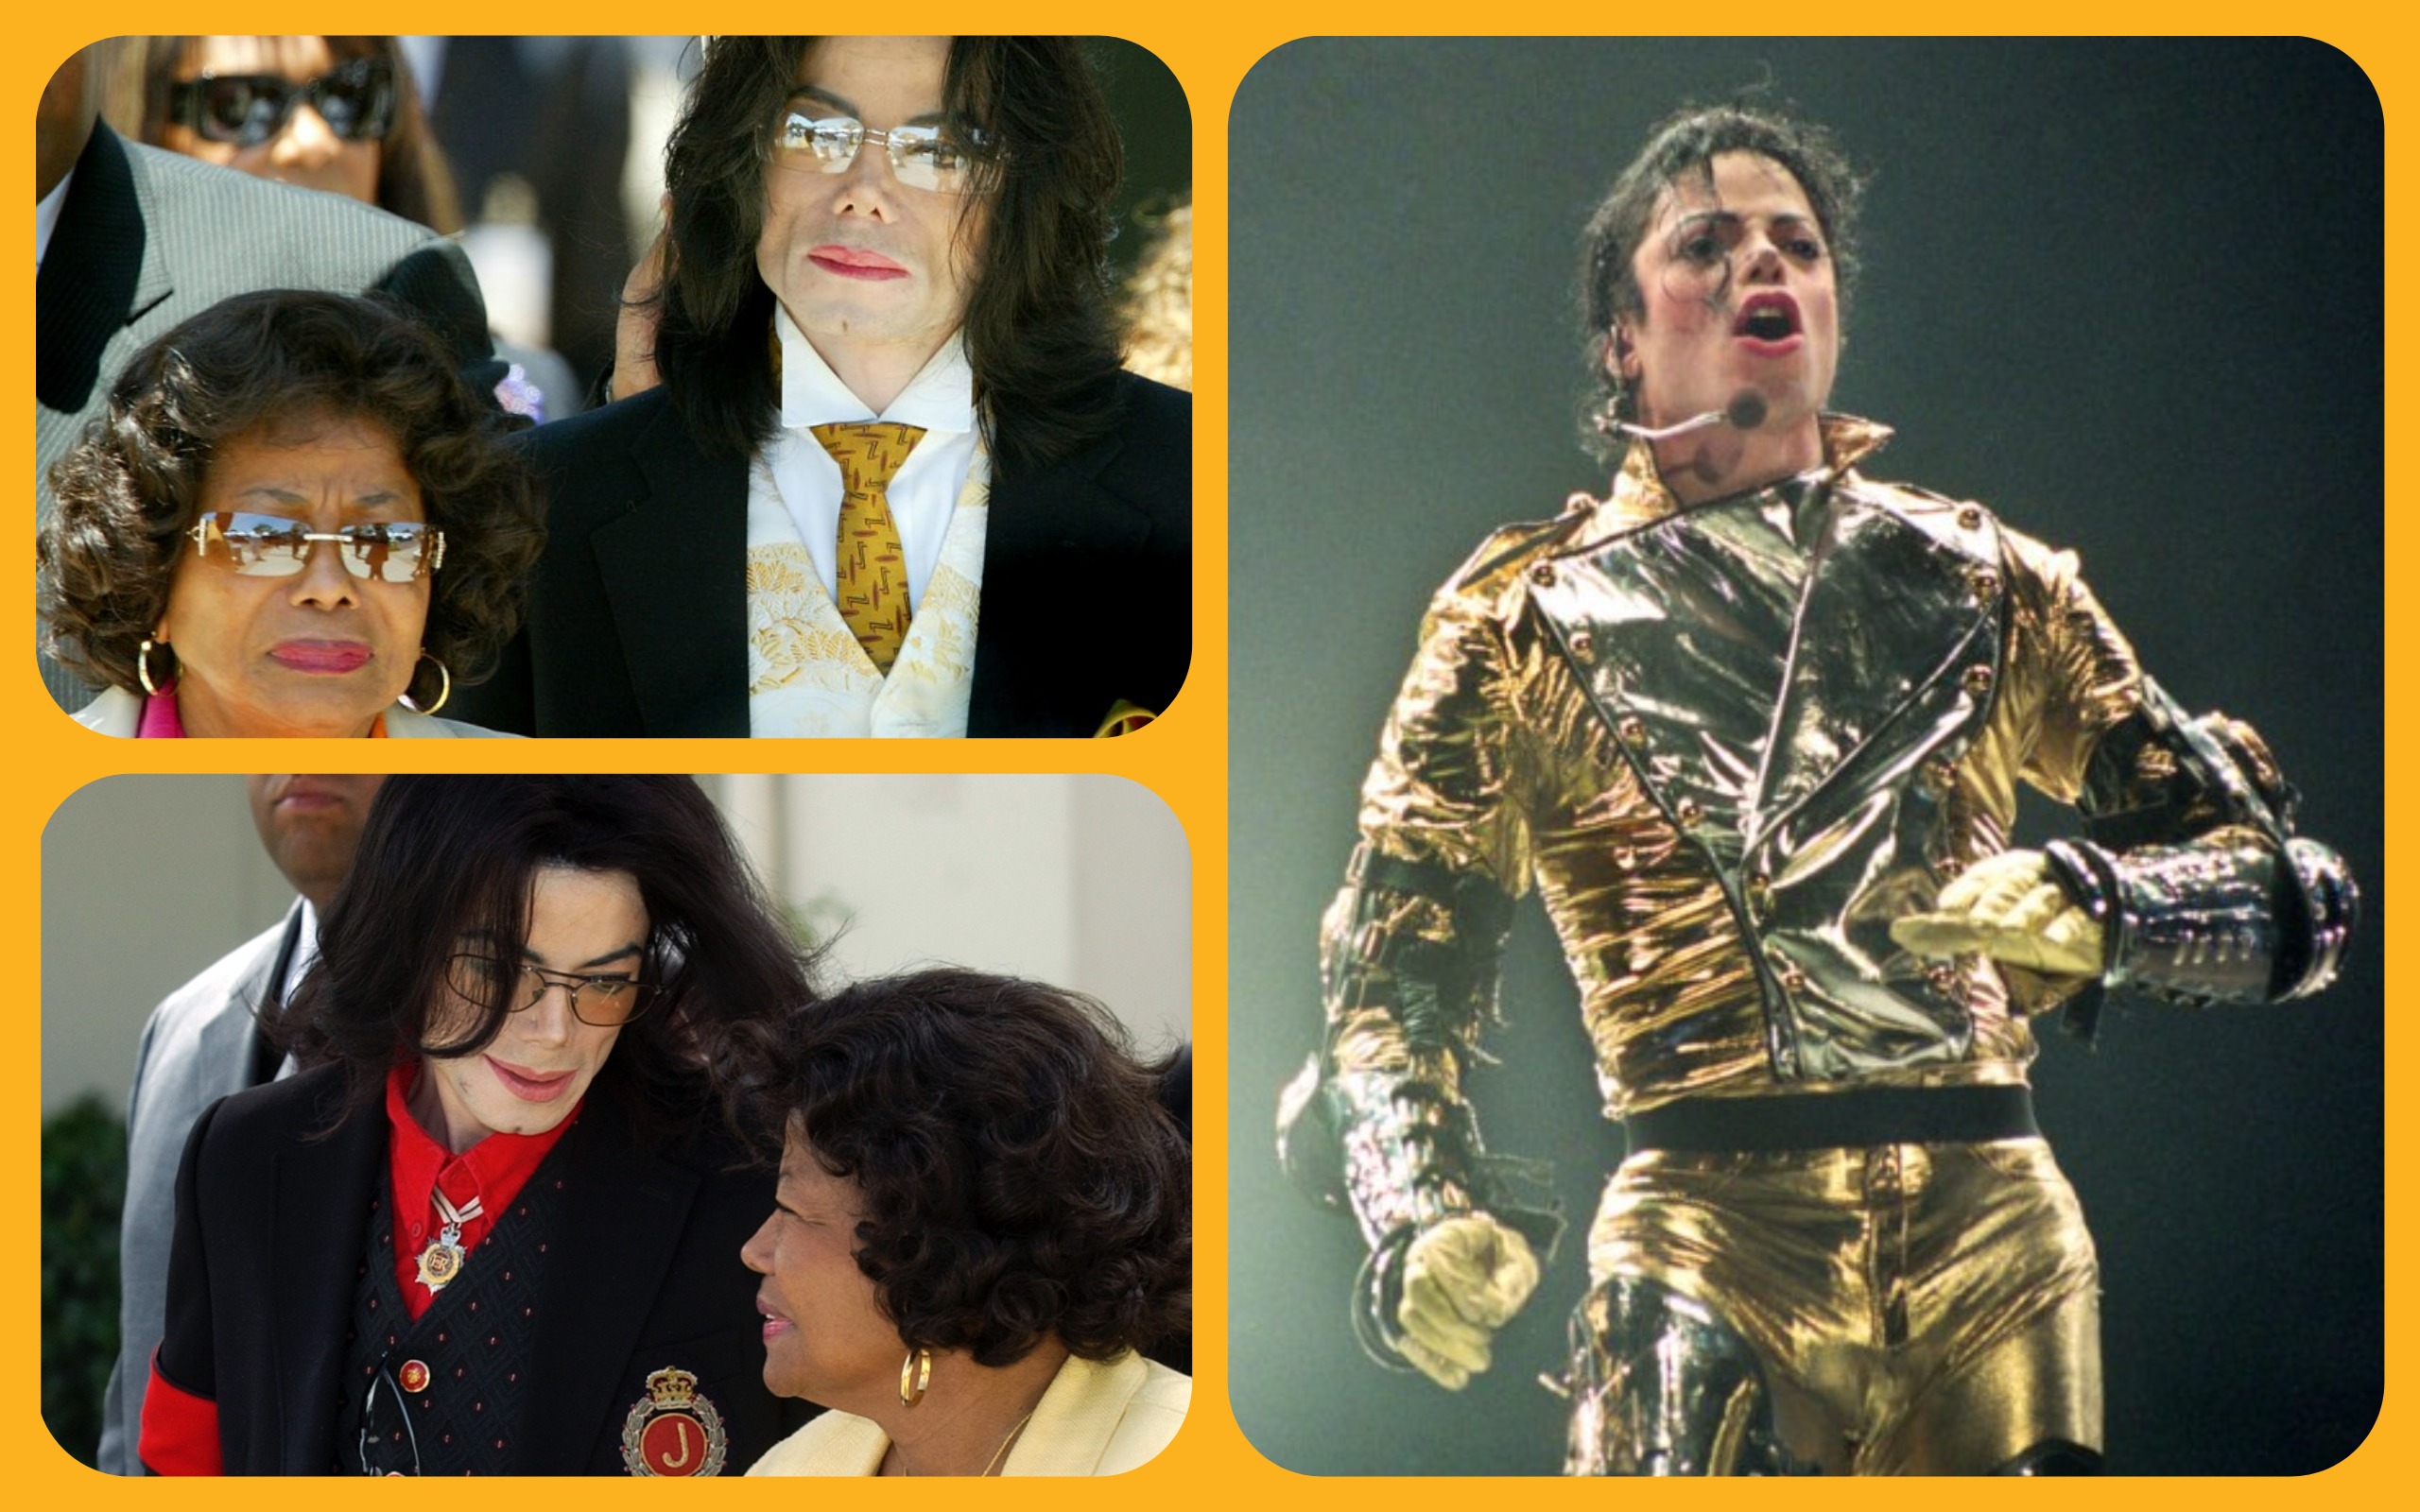 Michael Jackson’s Mom Has Received $55 Million From MJ’s Estate Since His Death